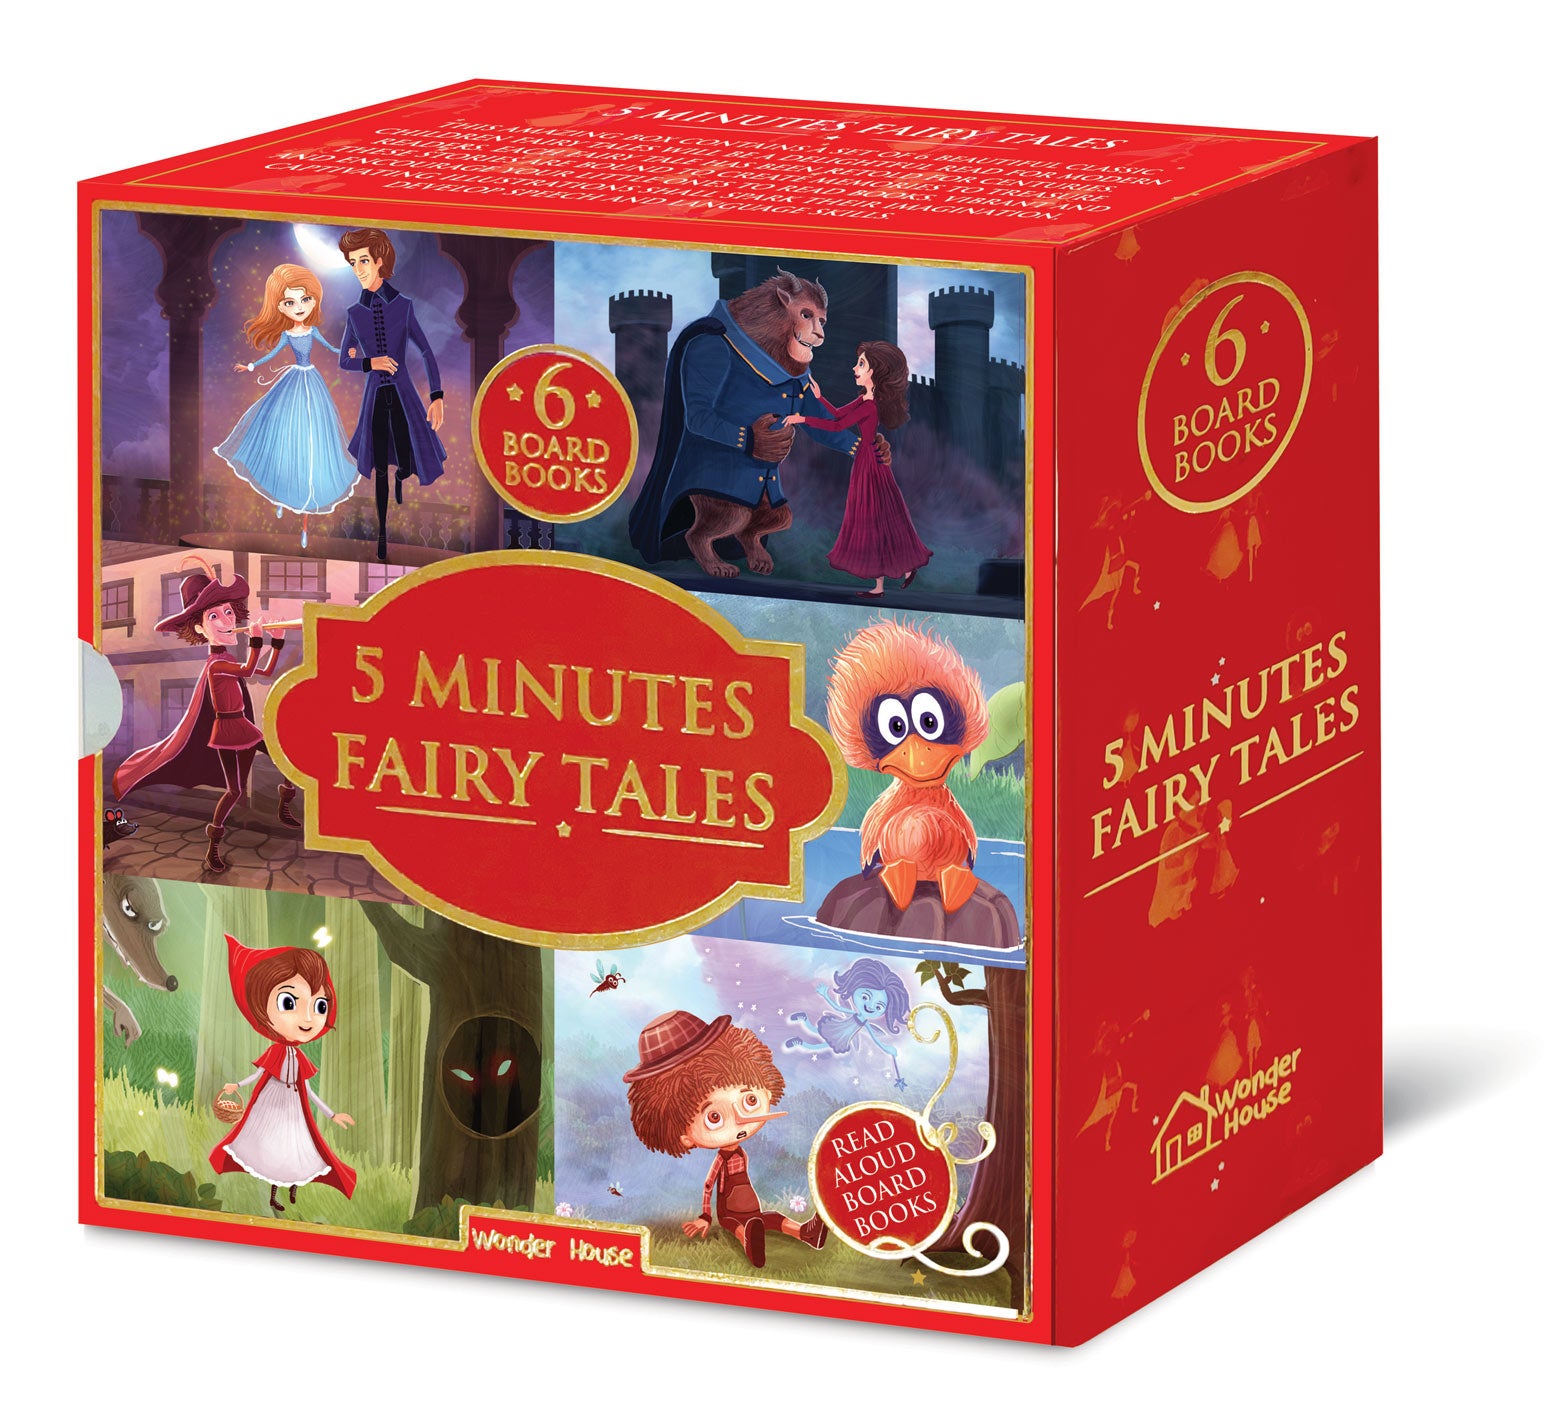 5 Minutes Fairy Tales Bookset: Giftset of 6 Board Books for Children (Abridged and Retold)